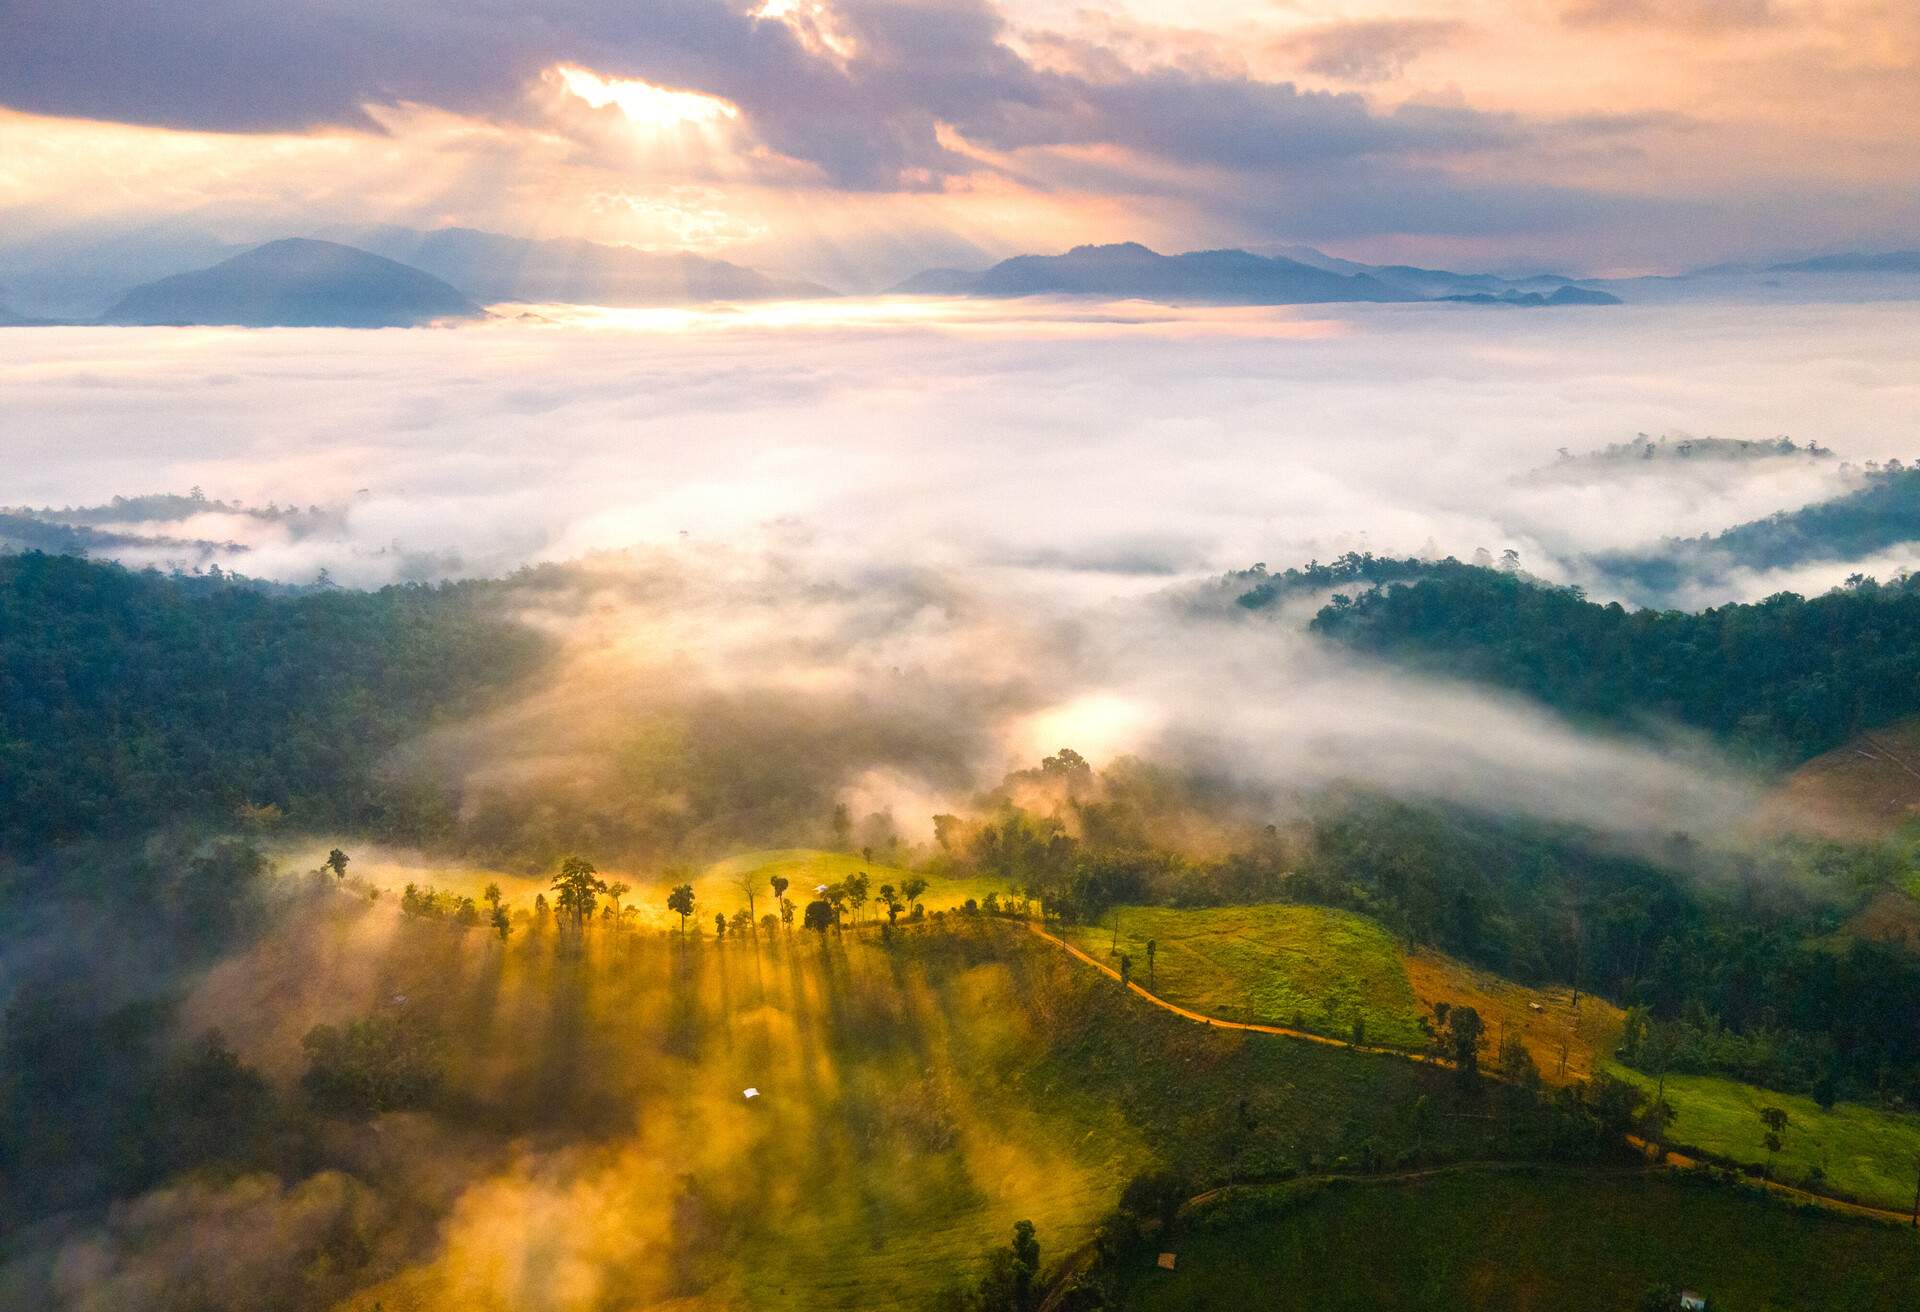 Top view from drone at Den TV, Wave of mist, sunlight and mountain curve in the morning, Chiang Mai, Thailand.